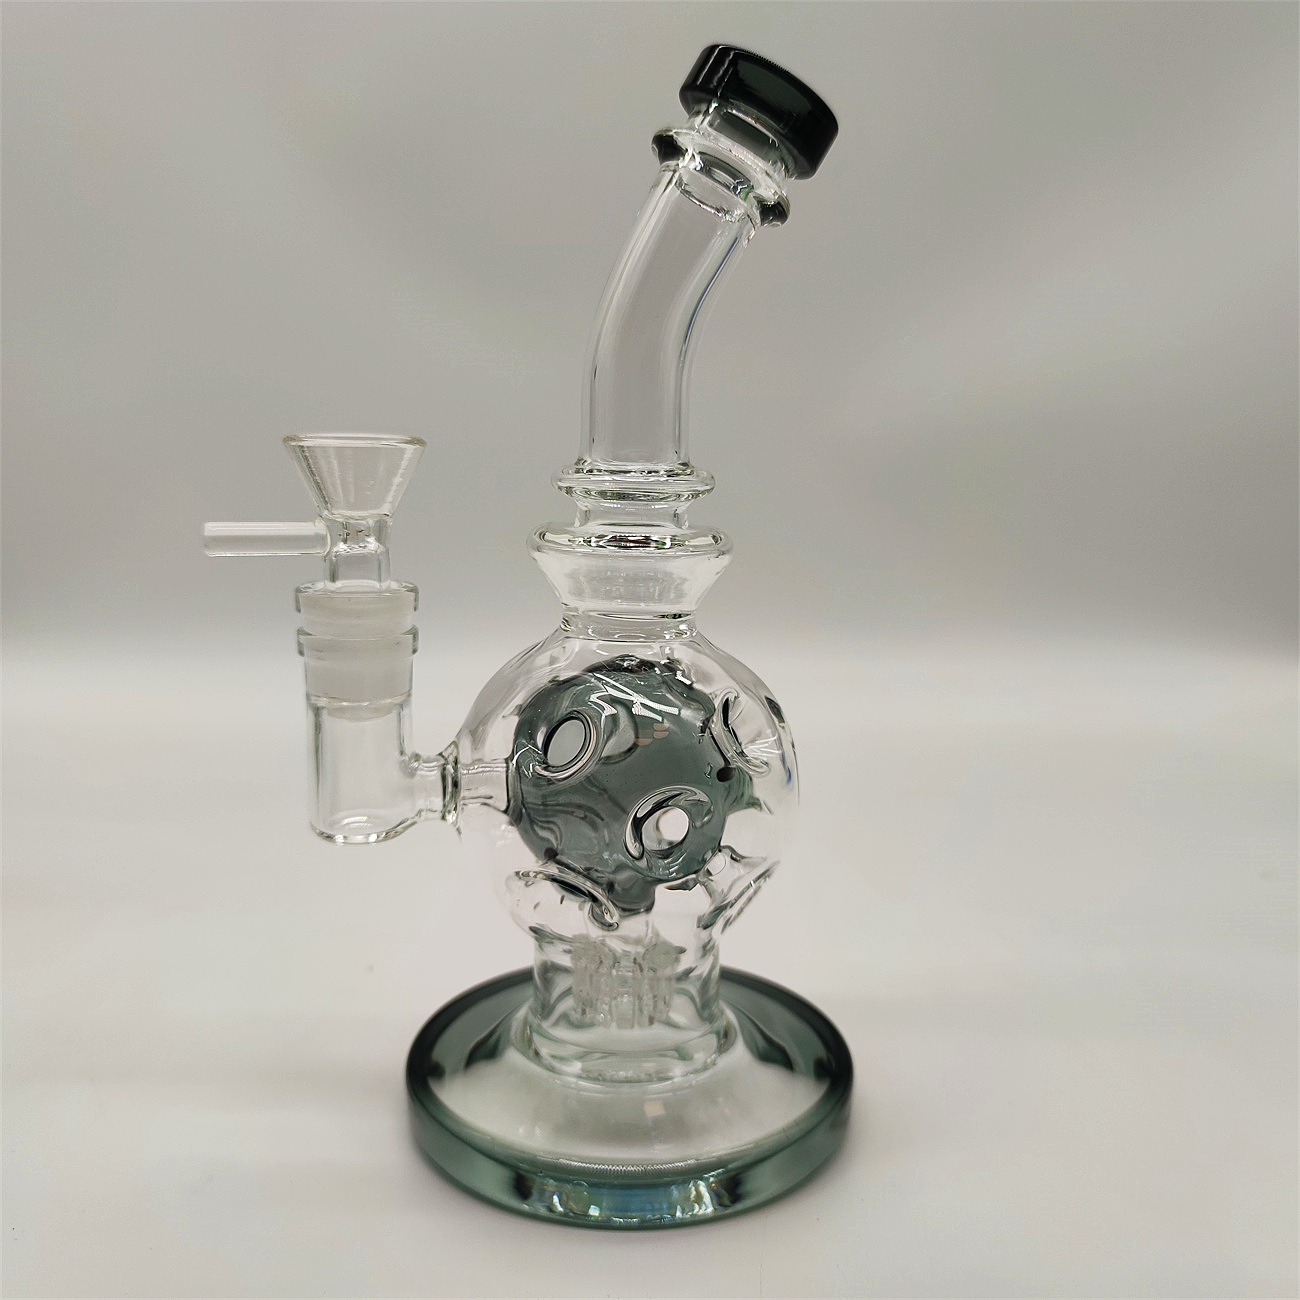 2022 8 Inch Heady Bong Glass Water Pipe Bong Dabber Rig Recycler Pipes Bongs Bllue Round Nest Comb Filter Smoke Pipes 14.4mm Female Joint with Regular Bowl&Banger